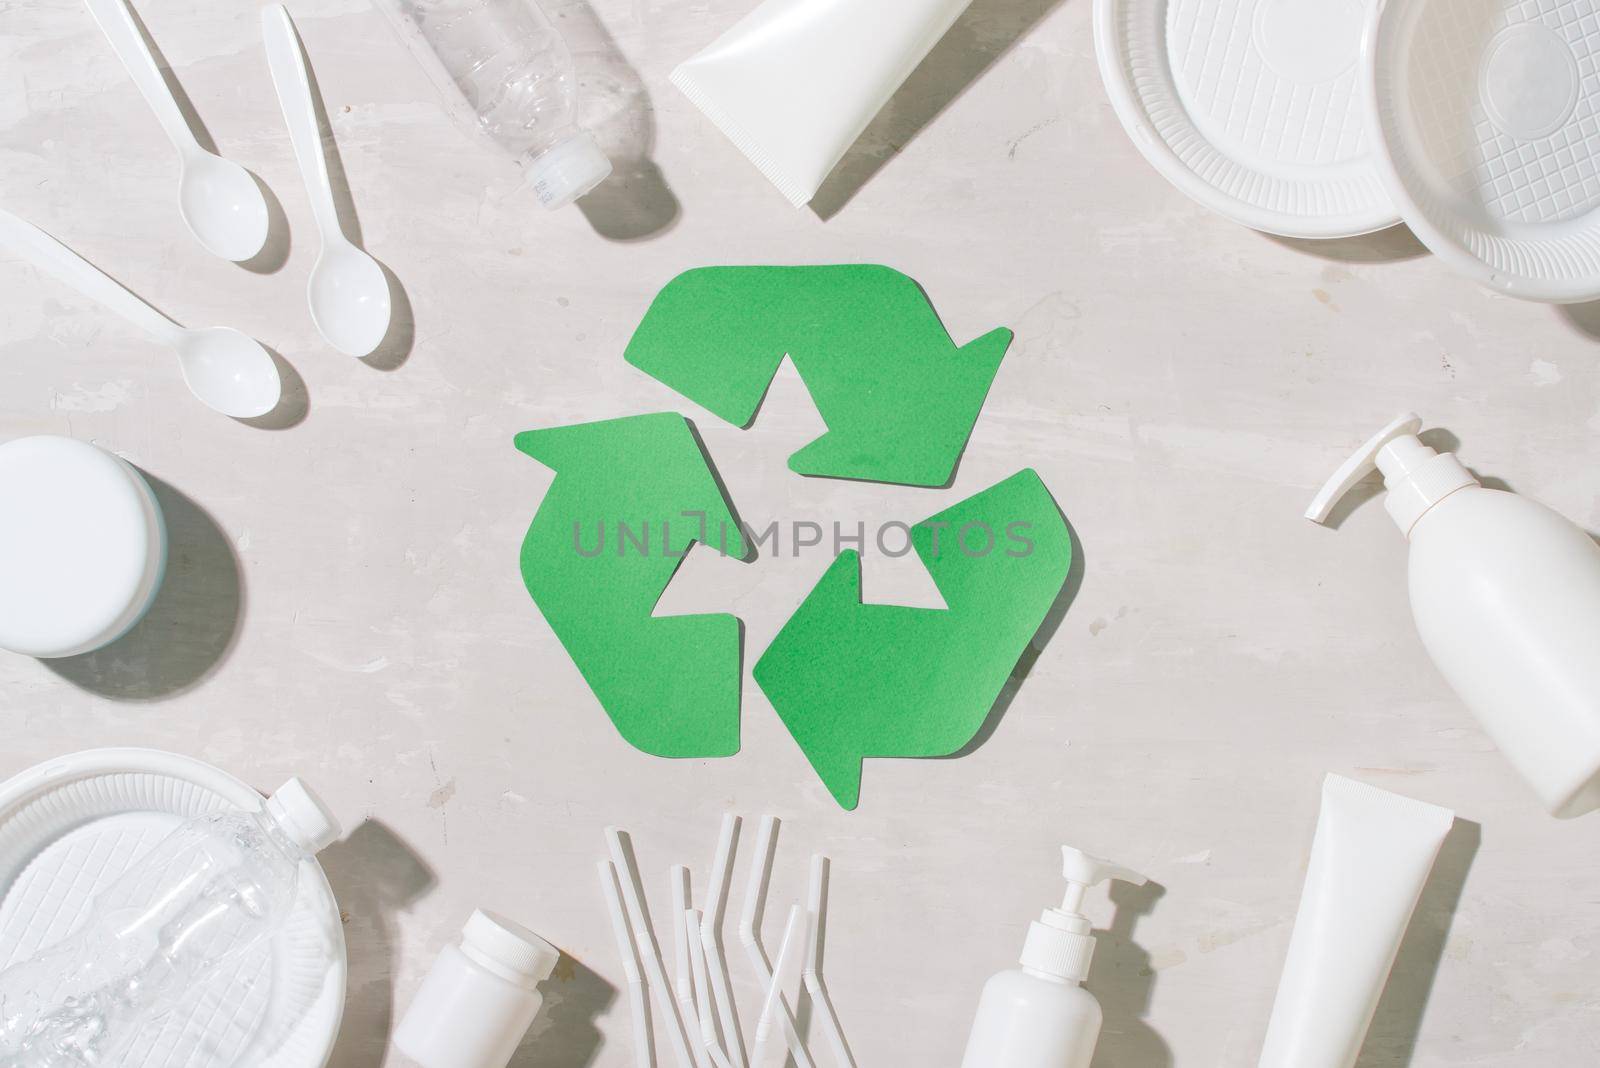 A selection of garbage for recycling. Segregated metal, plastic, paper and glass
 by makidotvn